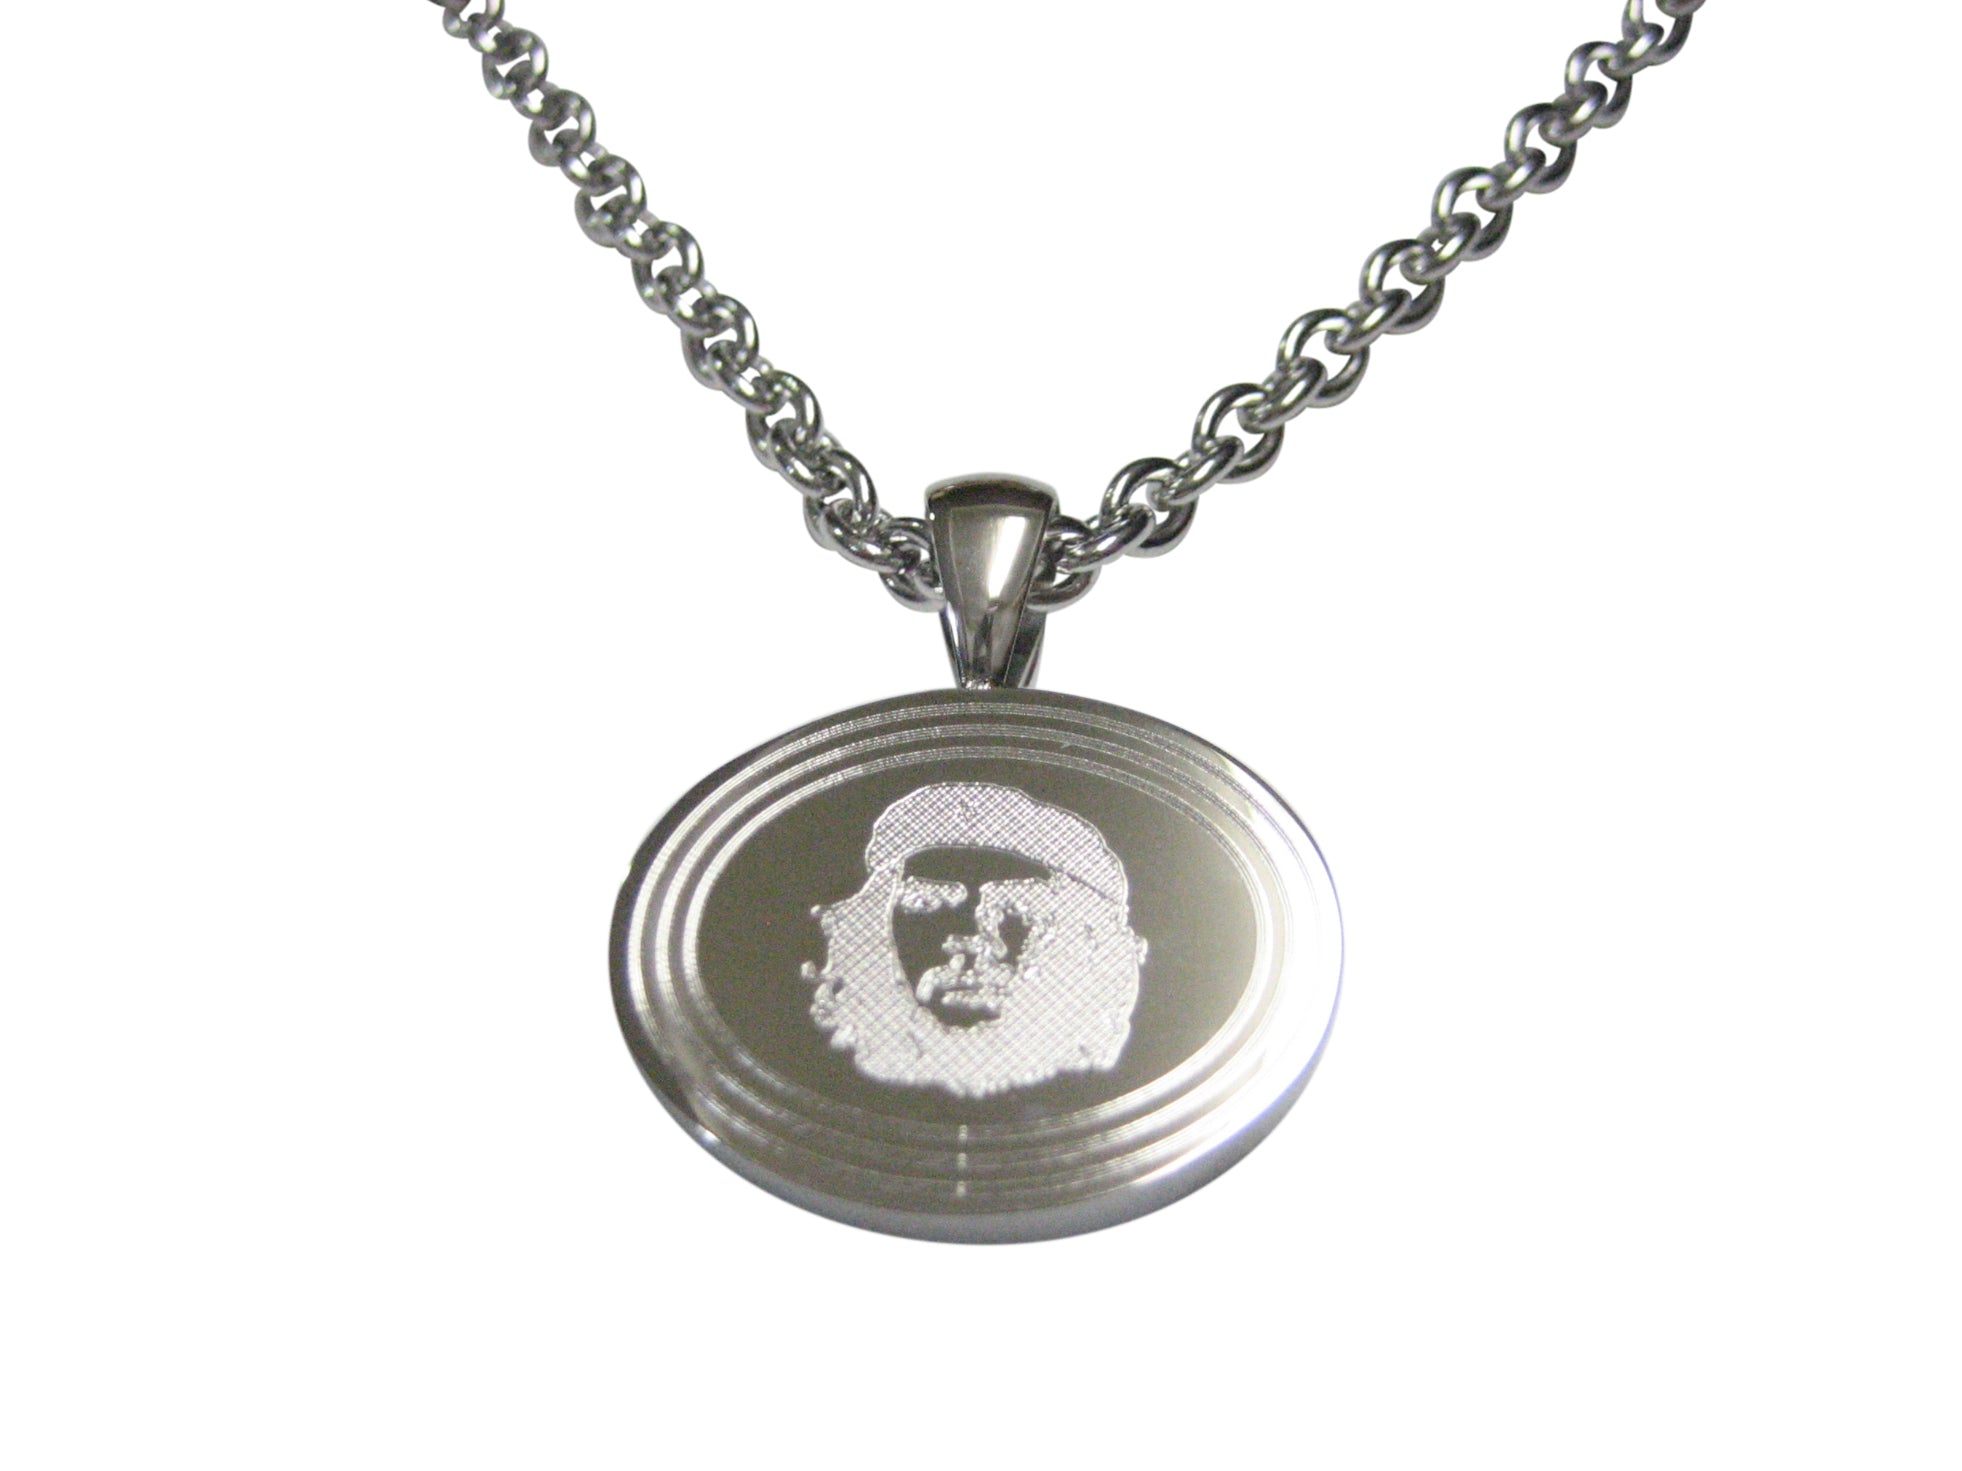 Silver Toned Etched Oval Che Guevara Pendant Necklace